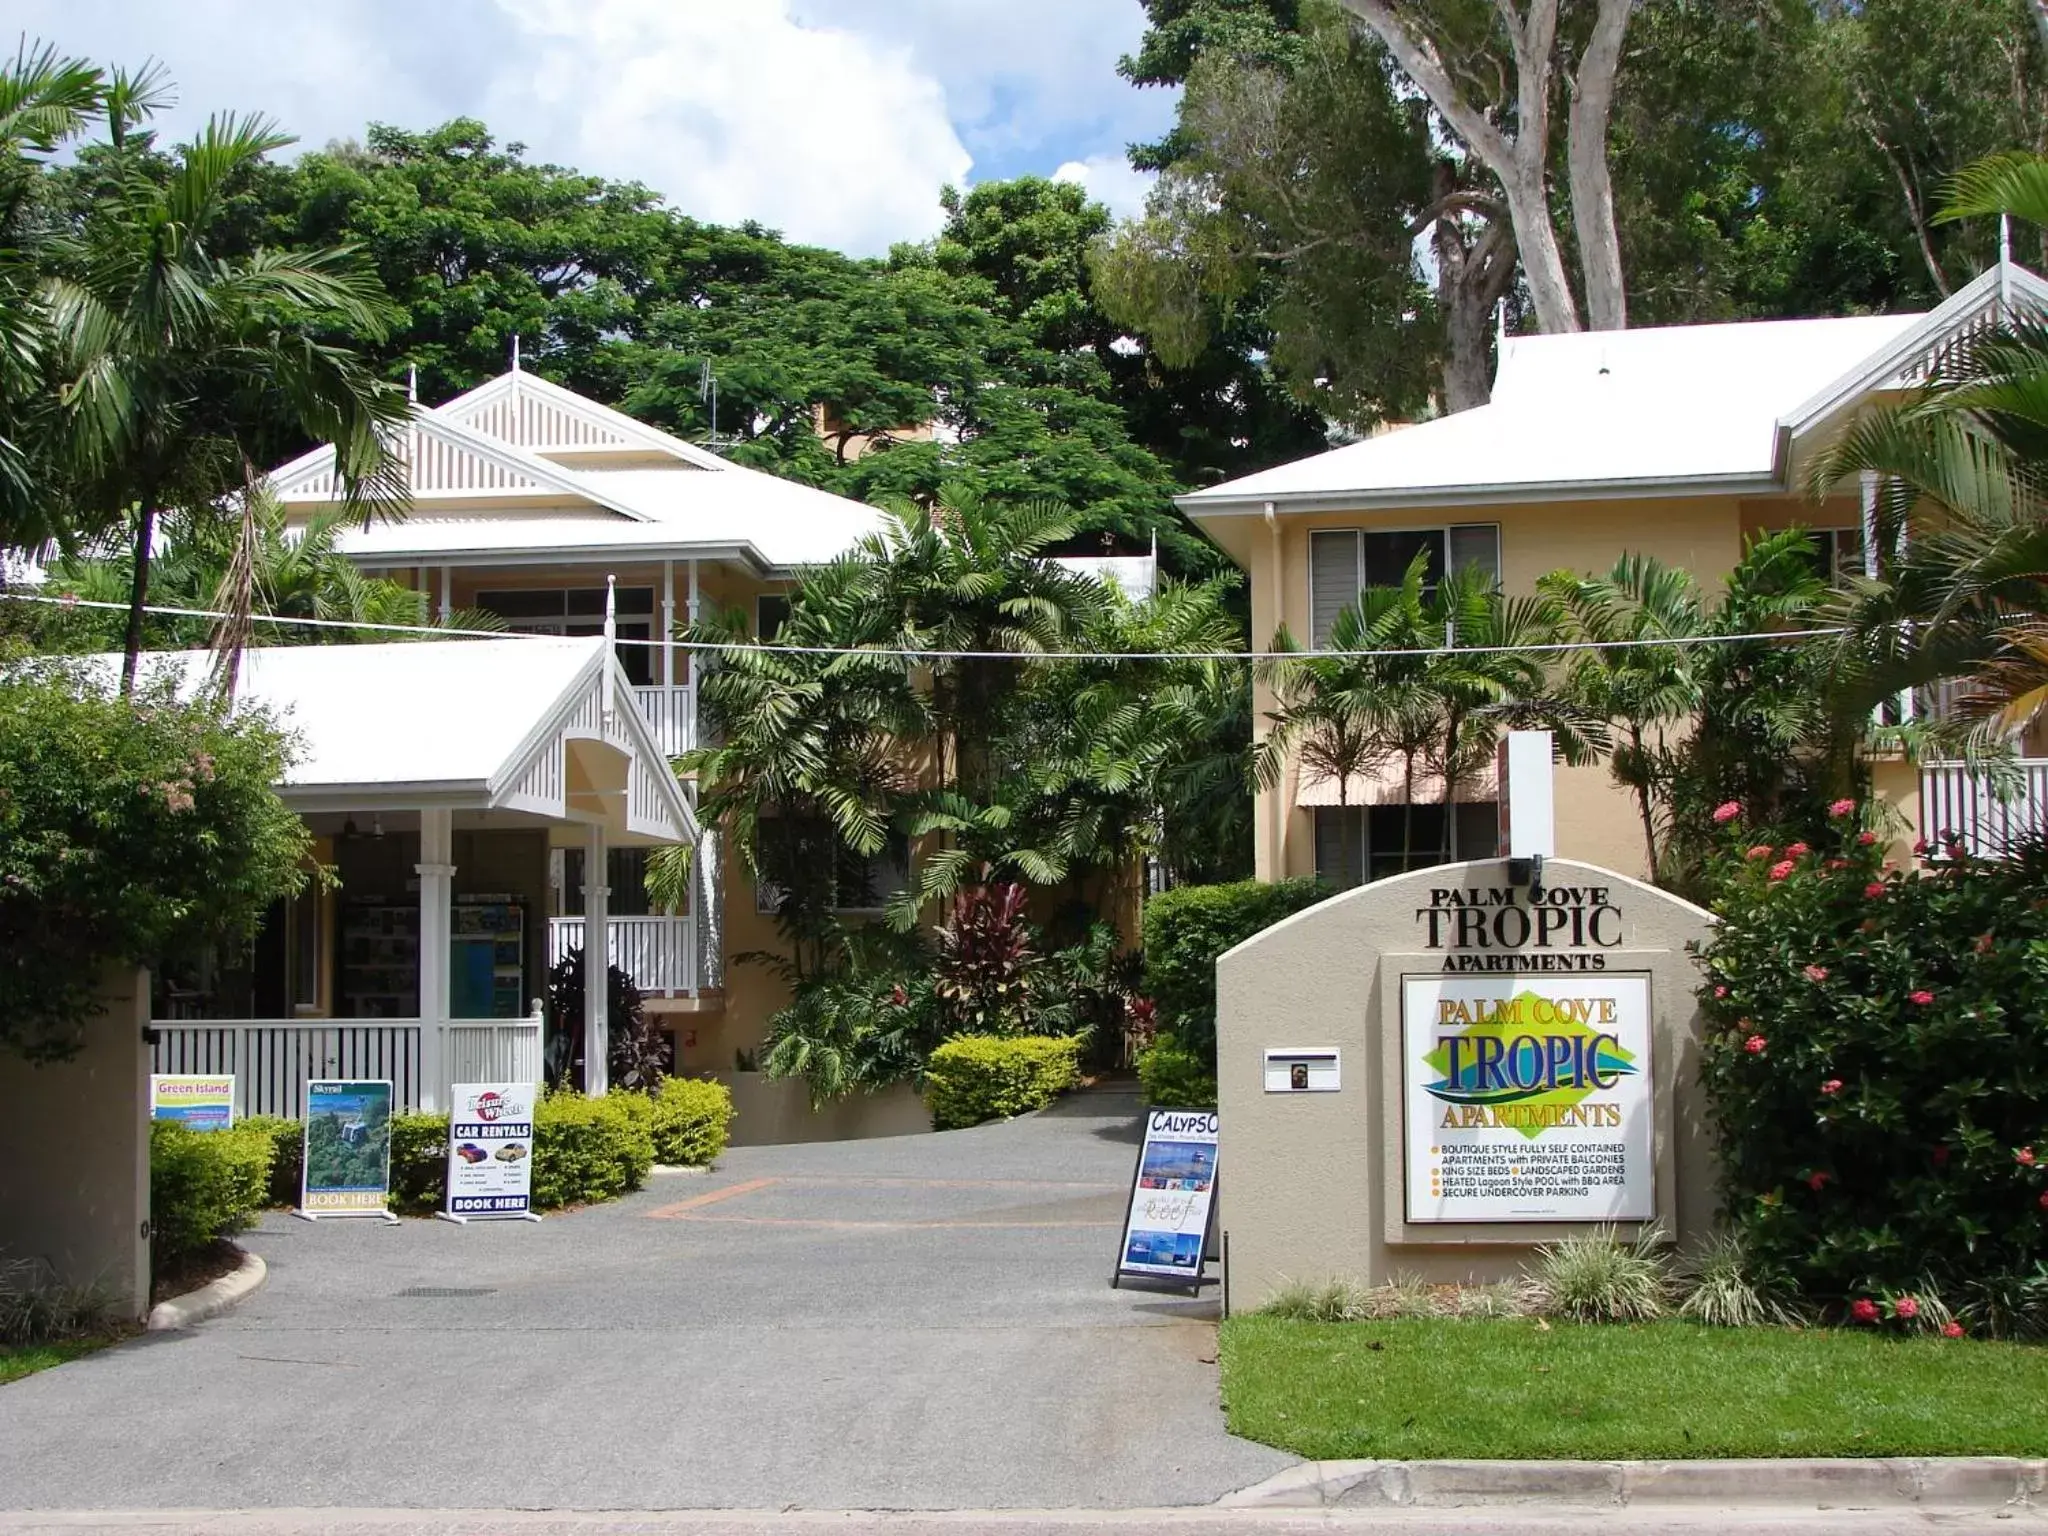 Property Building in Palm Cove Tropic Apartments